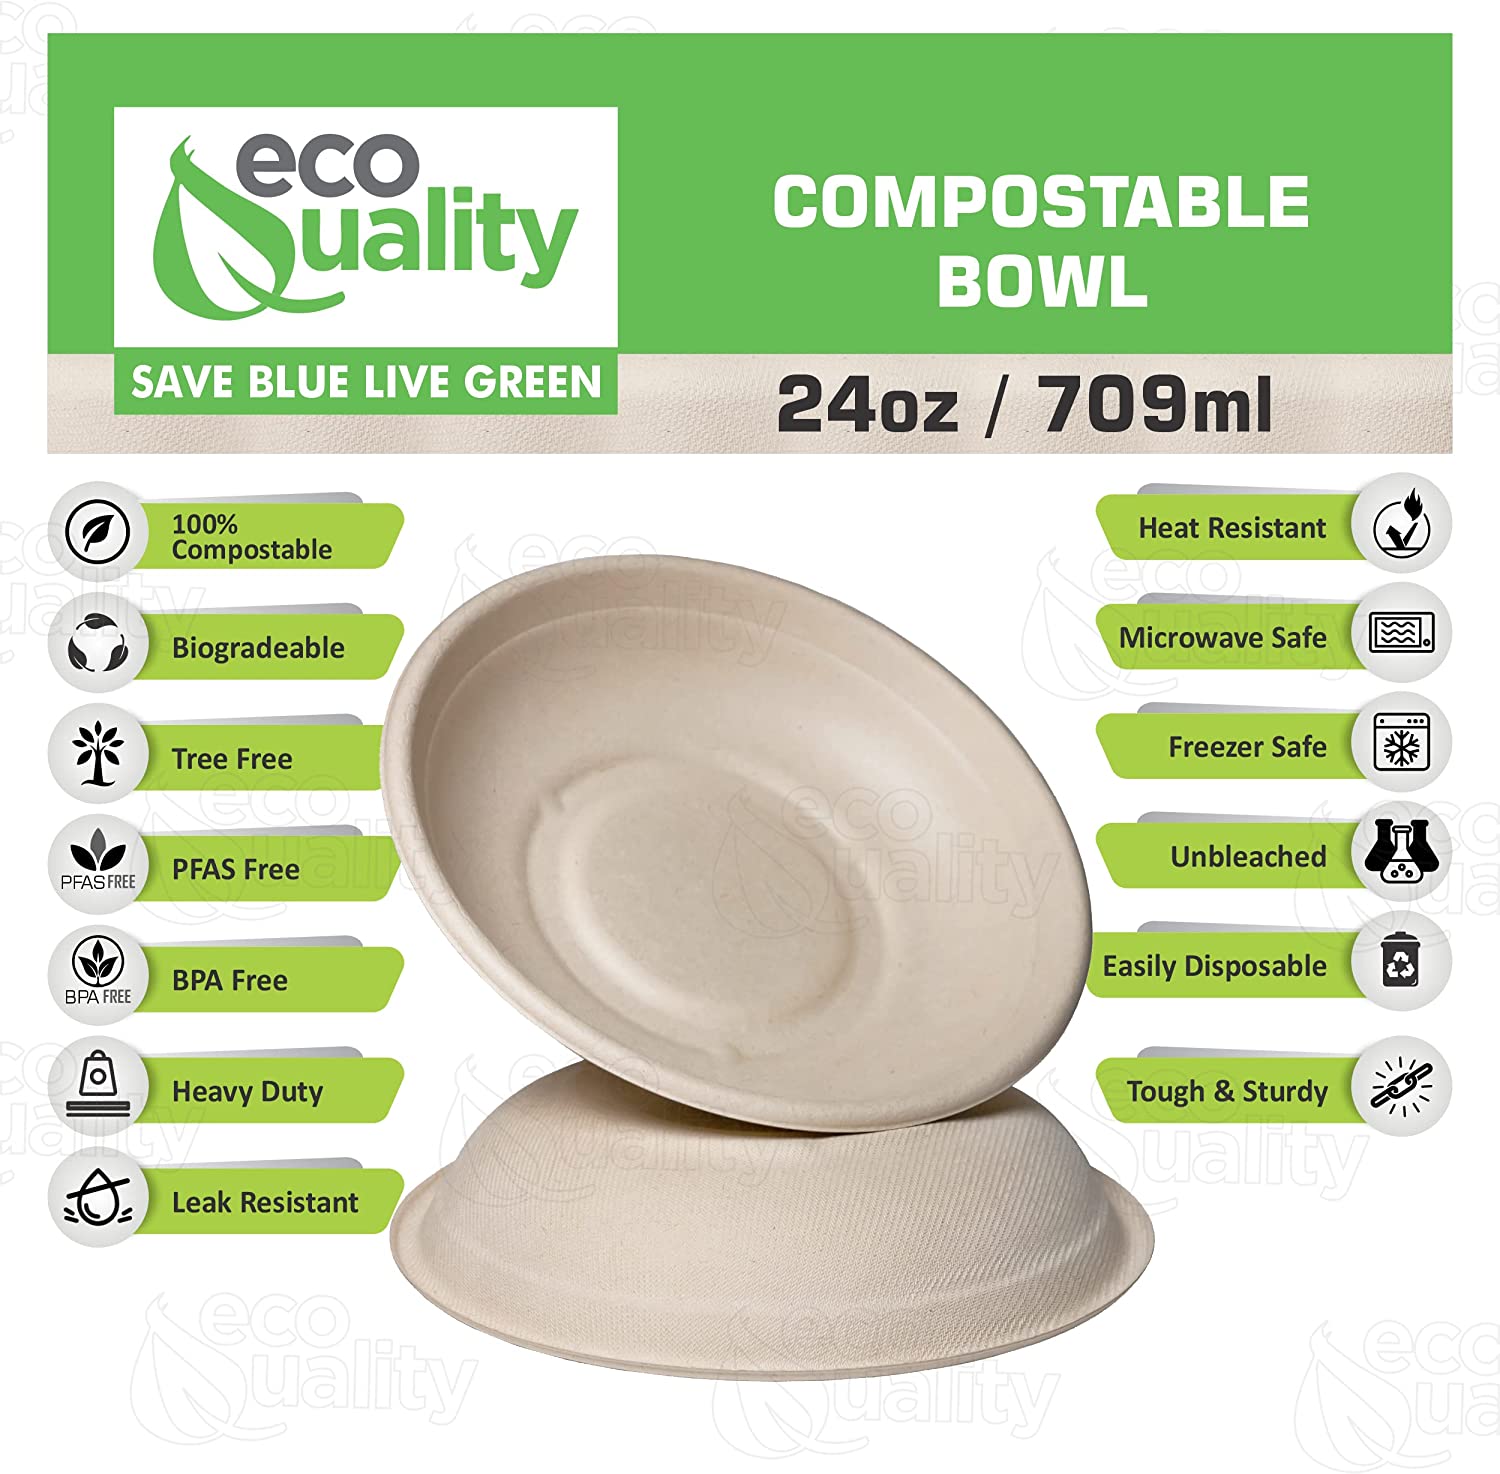 Compostable Heavy Duty Disposable Bowls, Eco Friendly, Natural Bagasse Unbleached Bamboo, Biodegradable, Tree Free, Heat & Liquid Resistant Bowl